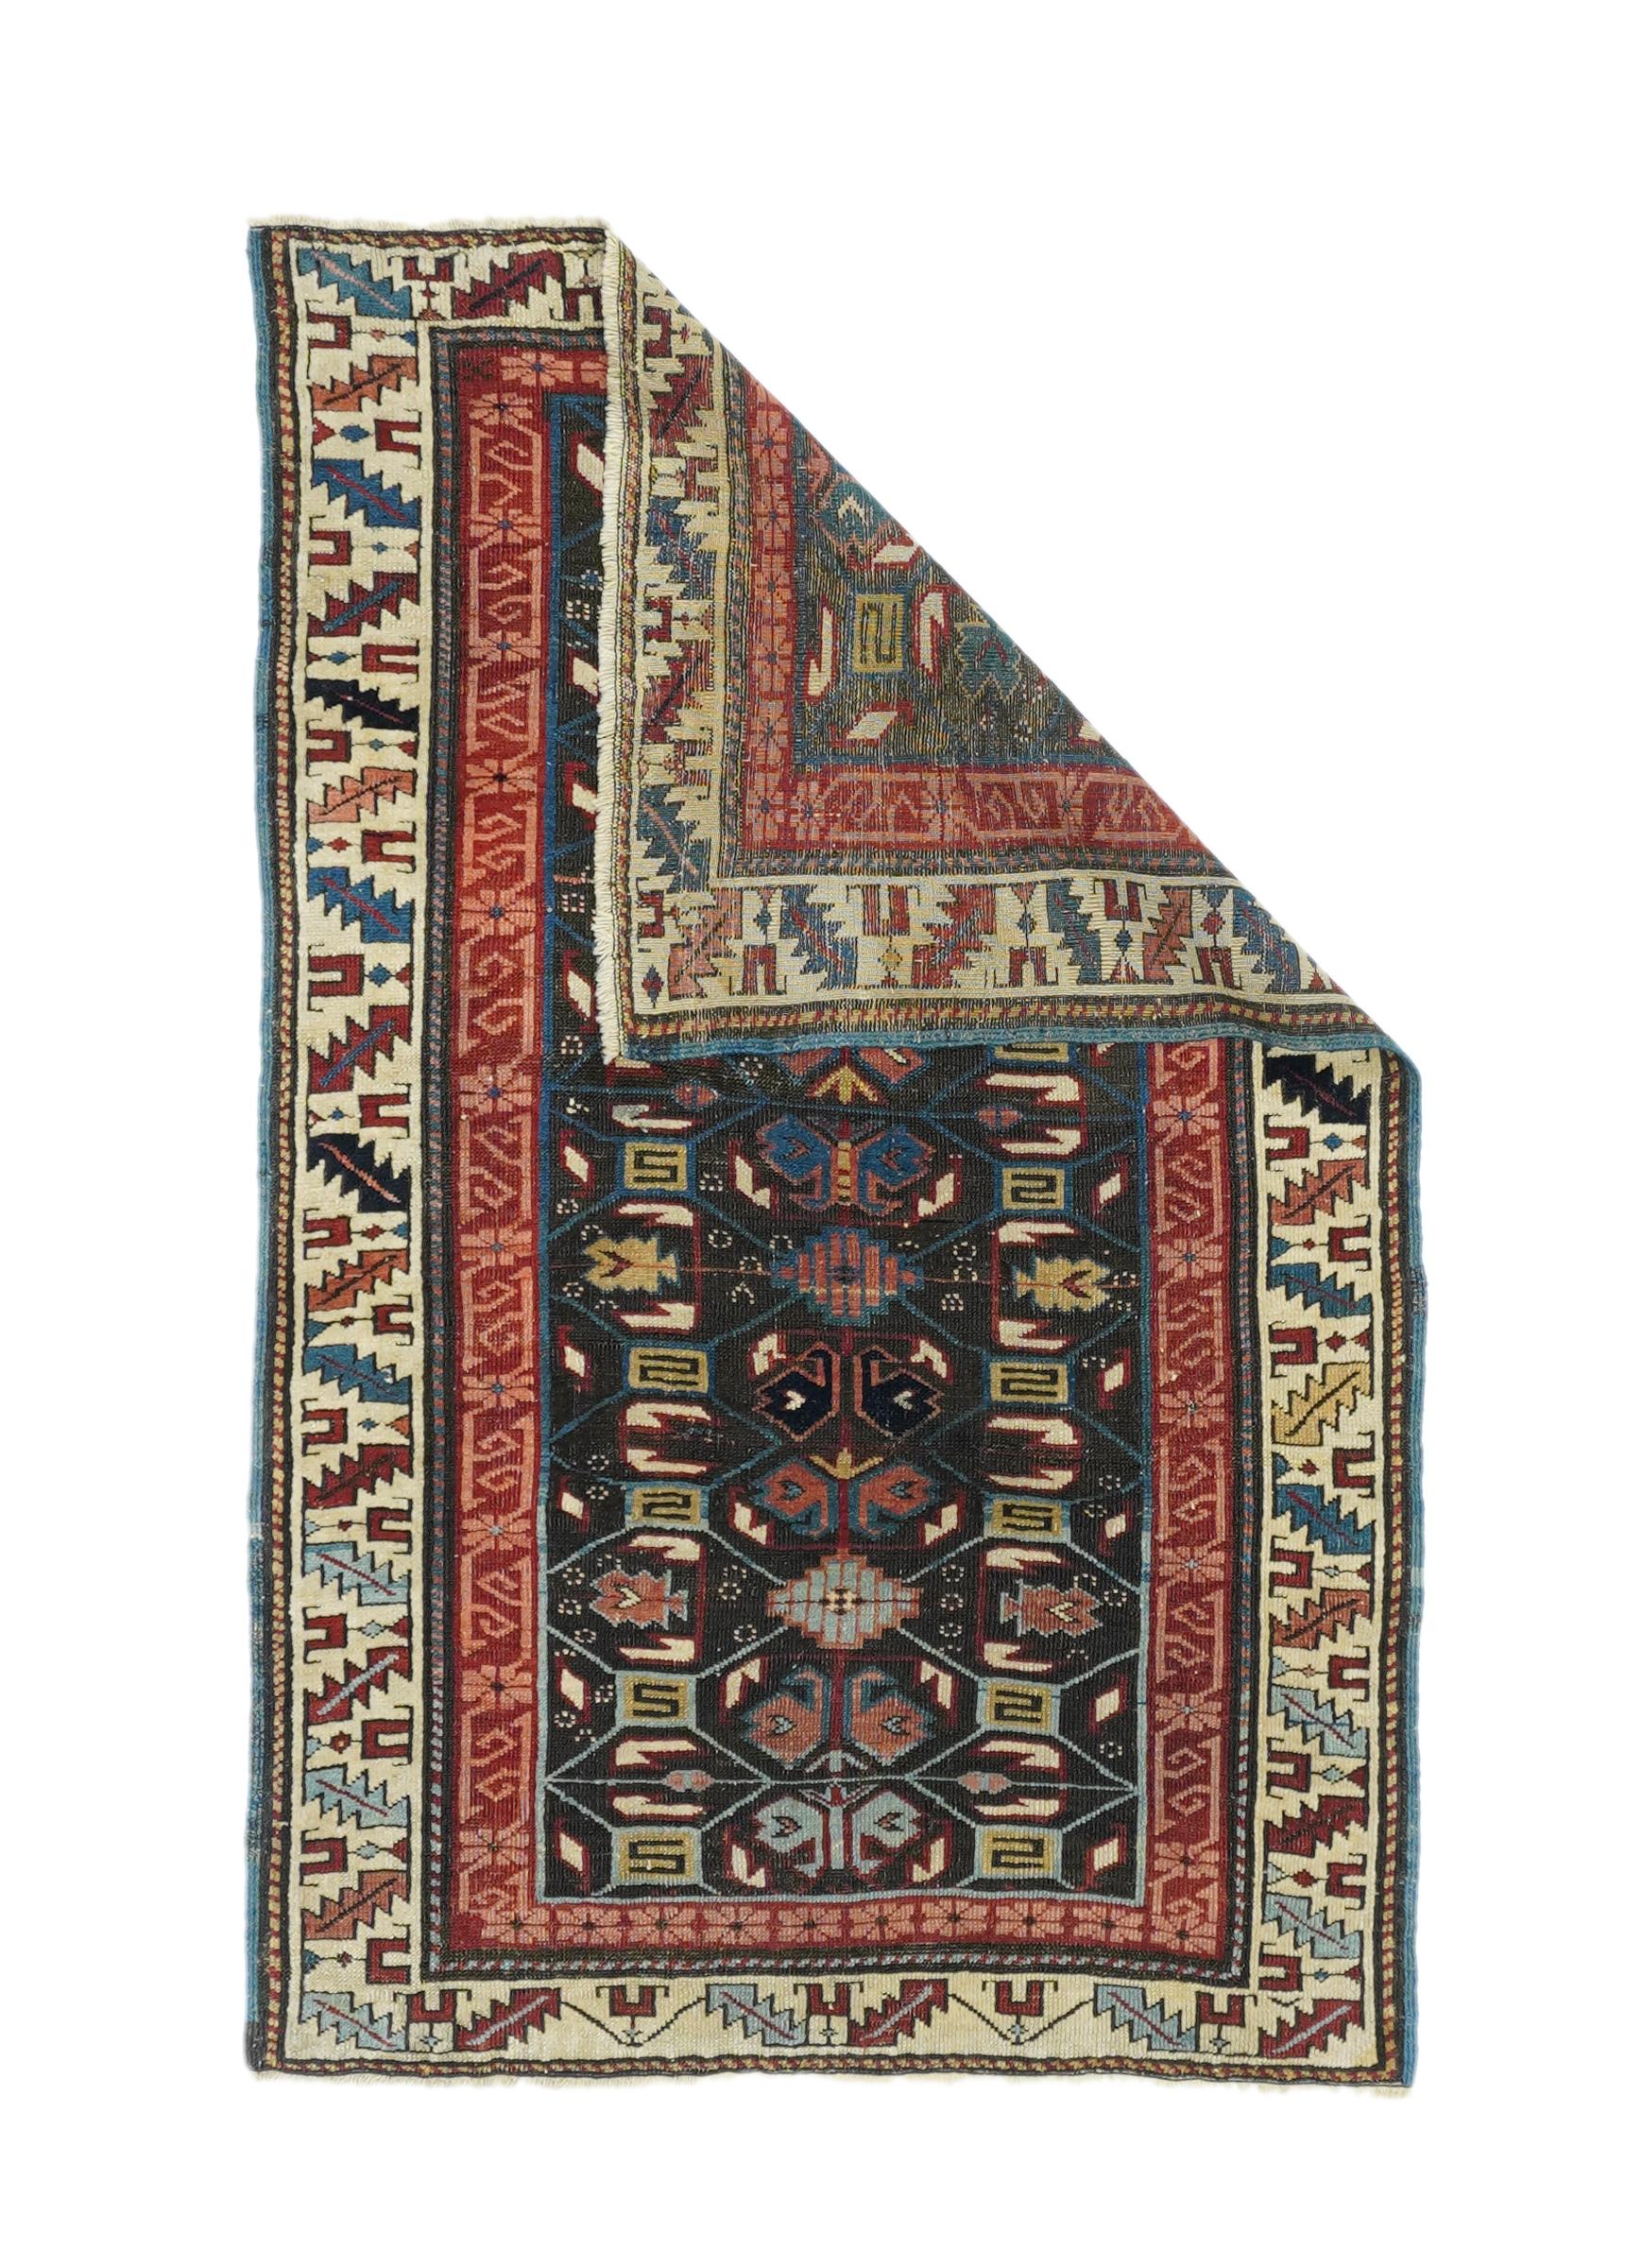 Antique Kuba rug 2'10'' x 4'5''. The dark red field displays five deeply serrated stacked lozenges in old gold, ecru, teal blue, charcoal and red, with ivory supporting stars. Teal blue border of wedge 